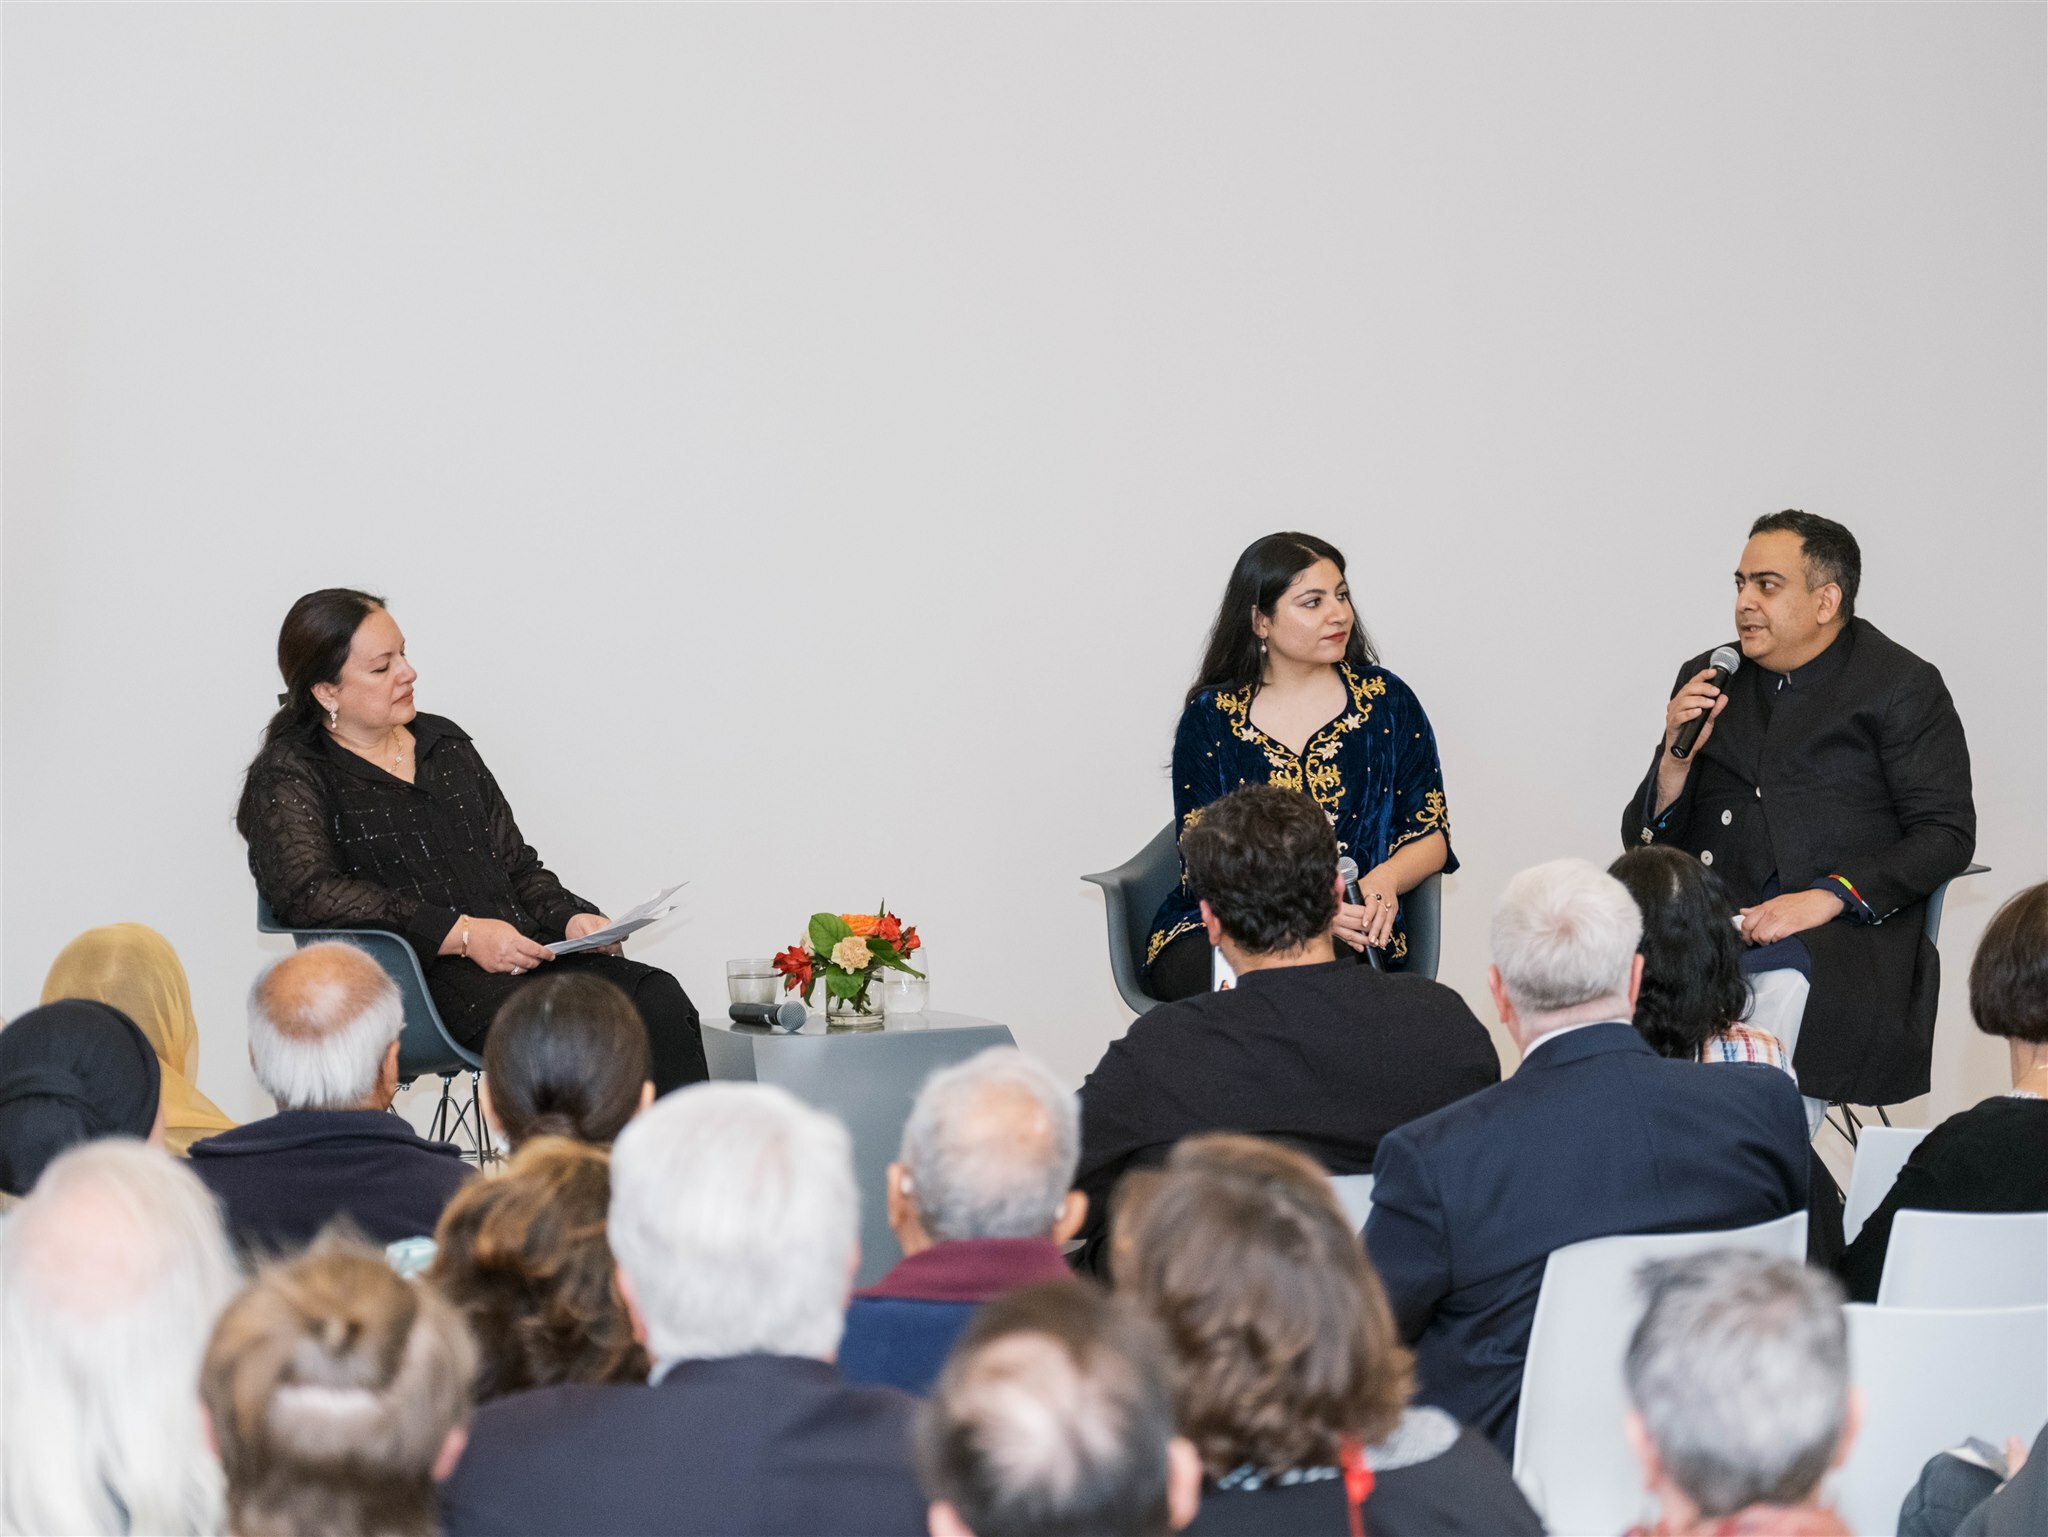 Three people sit on a stage against a white wall, all with dark hair and of South Asian decent, all dressed in black. A crowd of people sit in front of them.